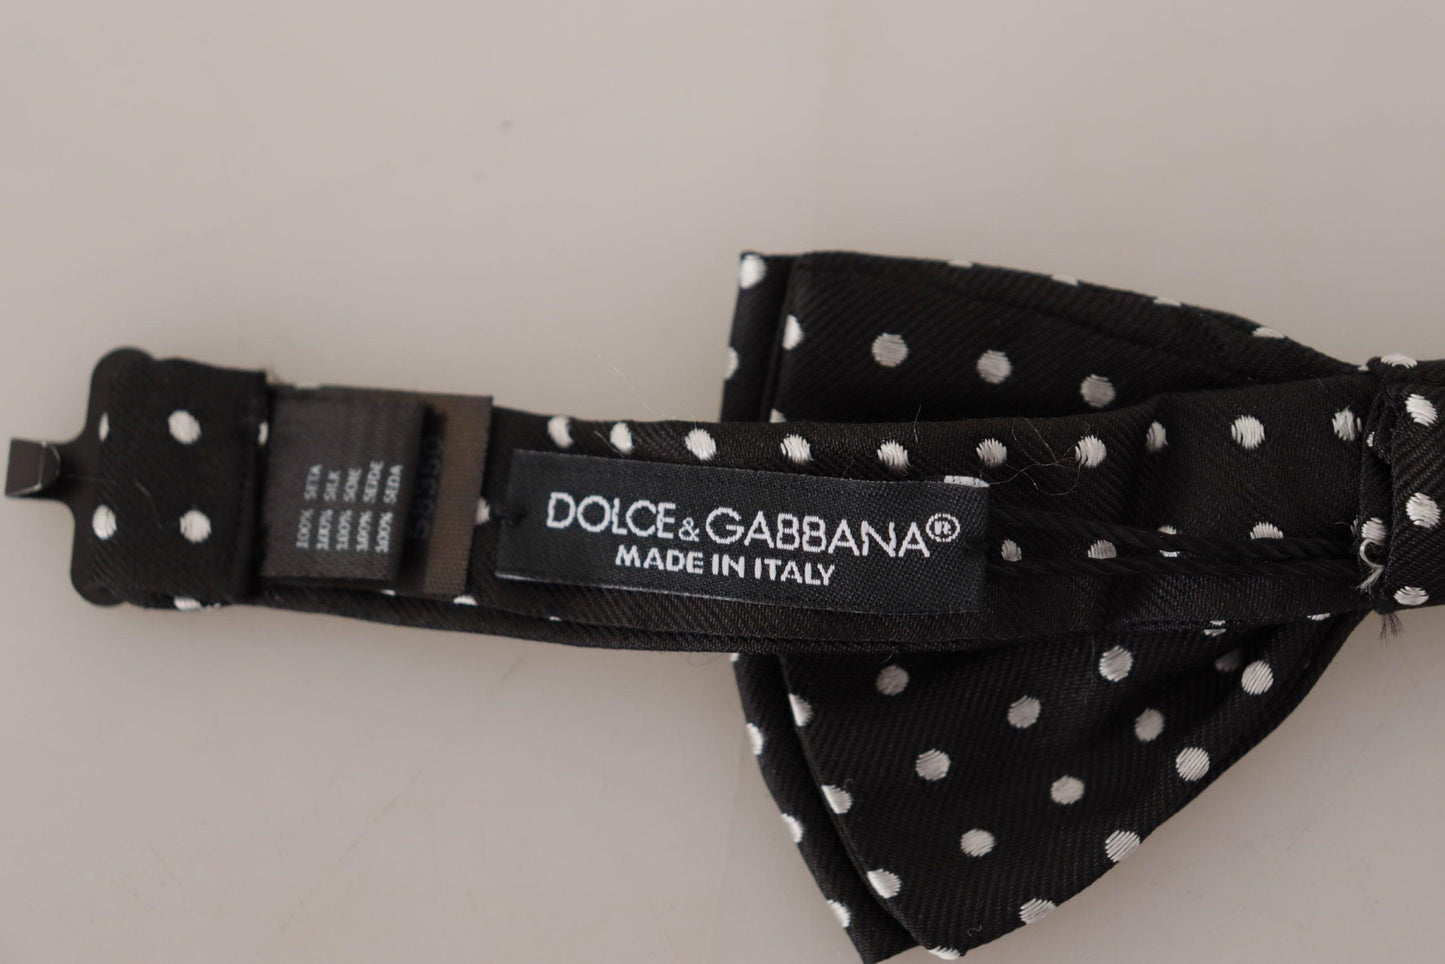 Dolce & Gabbana Black White Polka Dot 100% Silk Neck Papillon Bow Tie - Designed by Dolce & Gabbana Available to Buy at a Discounted Price on Moon Behind The Hill Online Designer Discount Sto